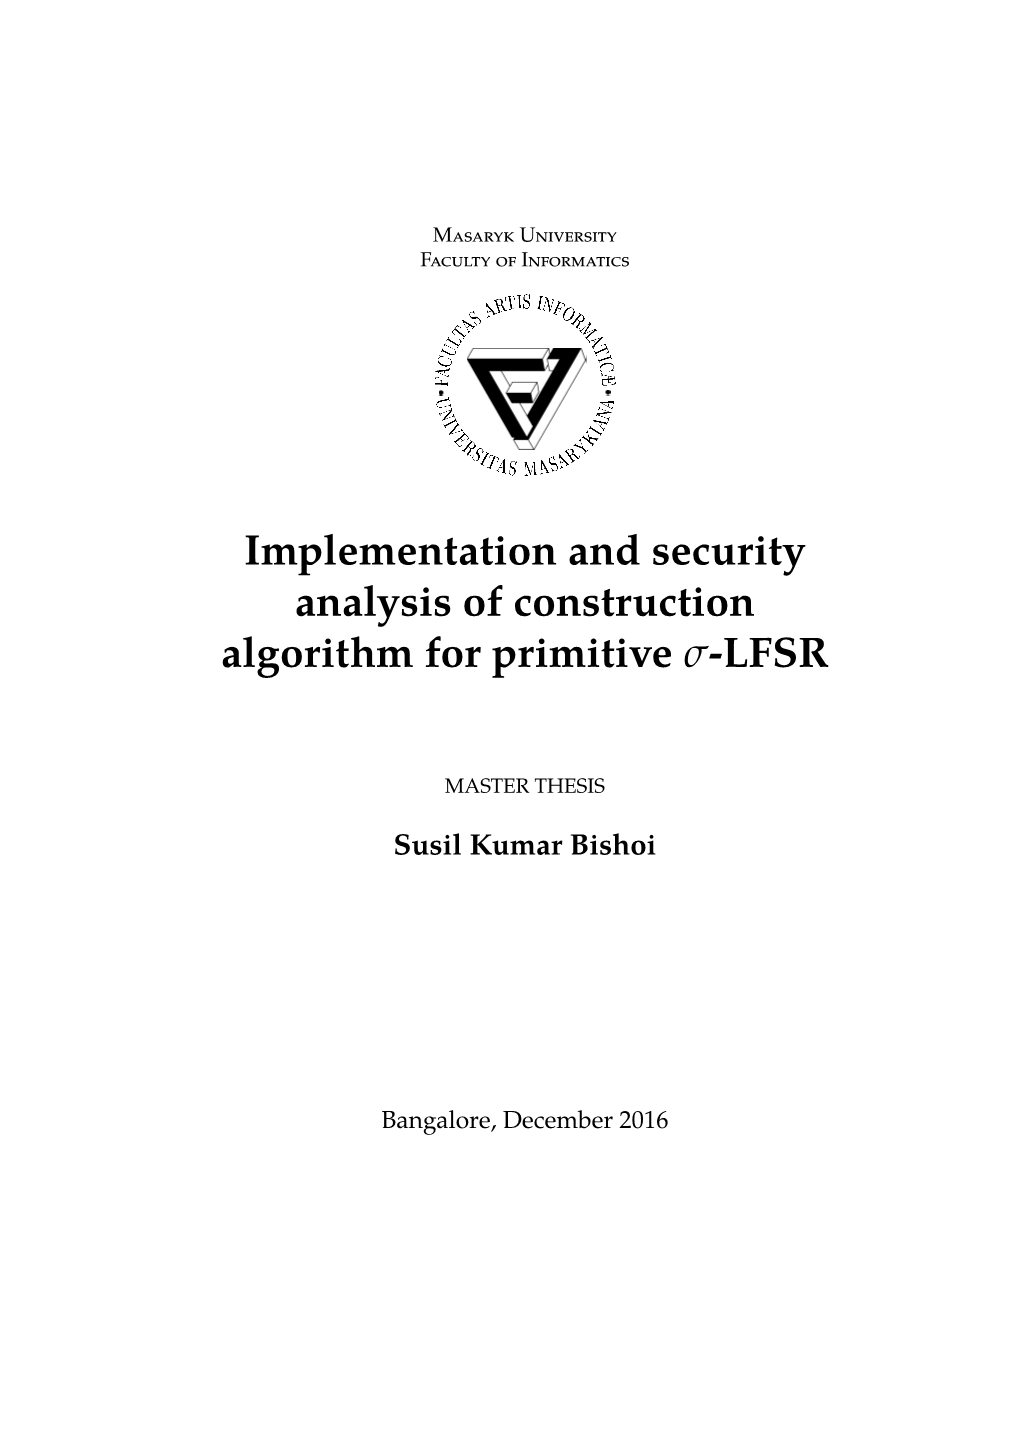 Implementation and Security Analysis of Construction Algorithm for Primitive Σ-LFSR